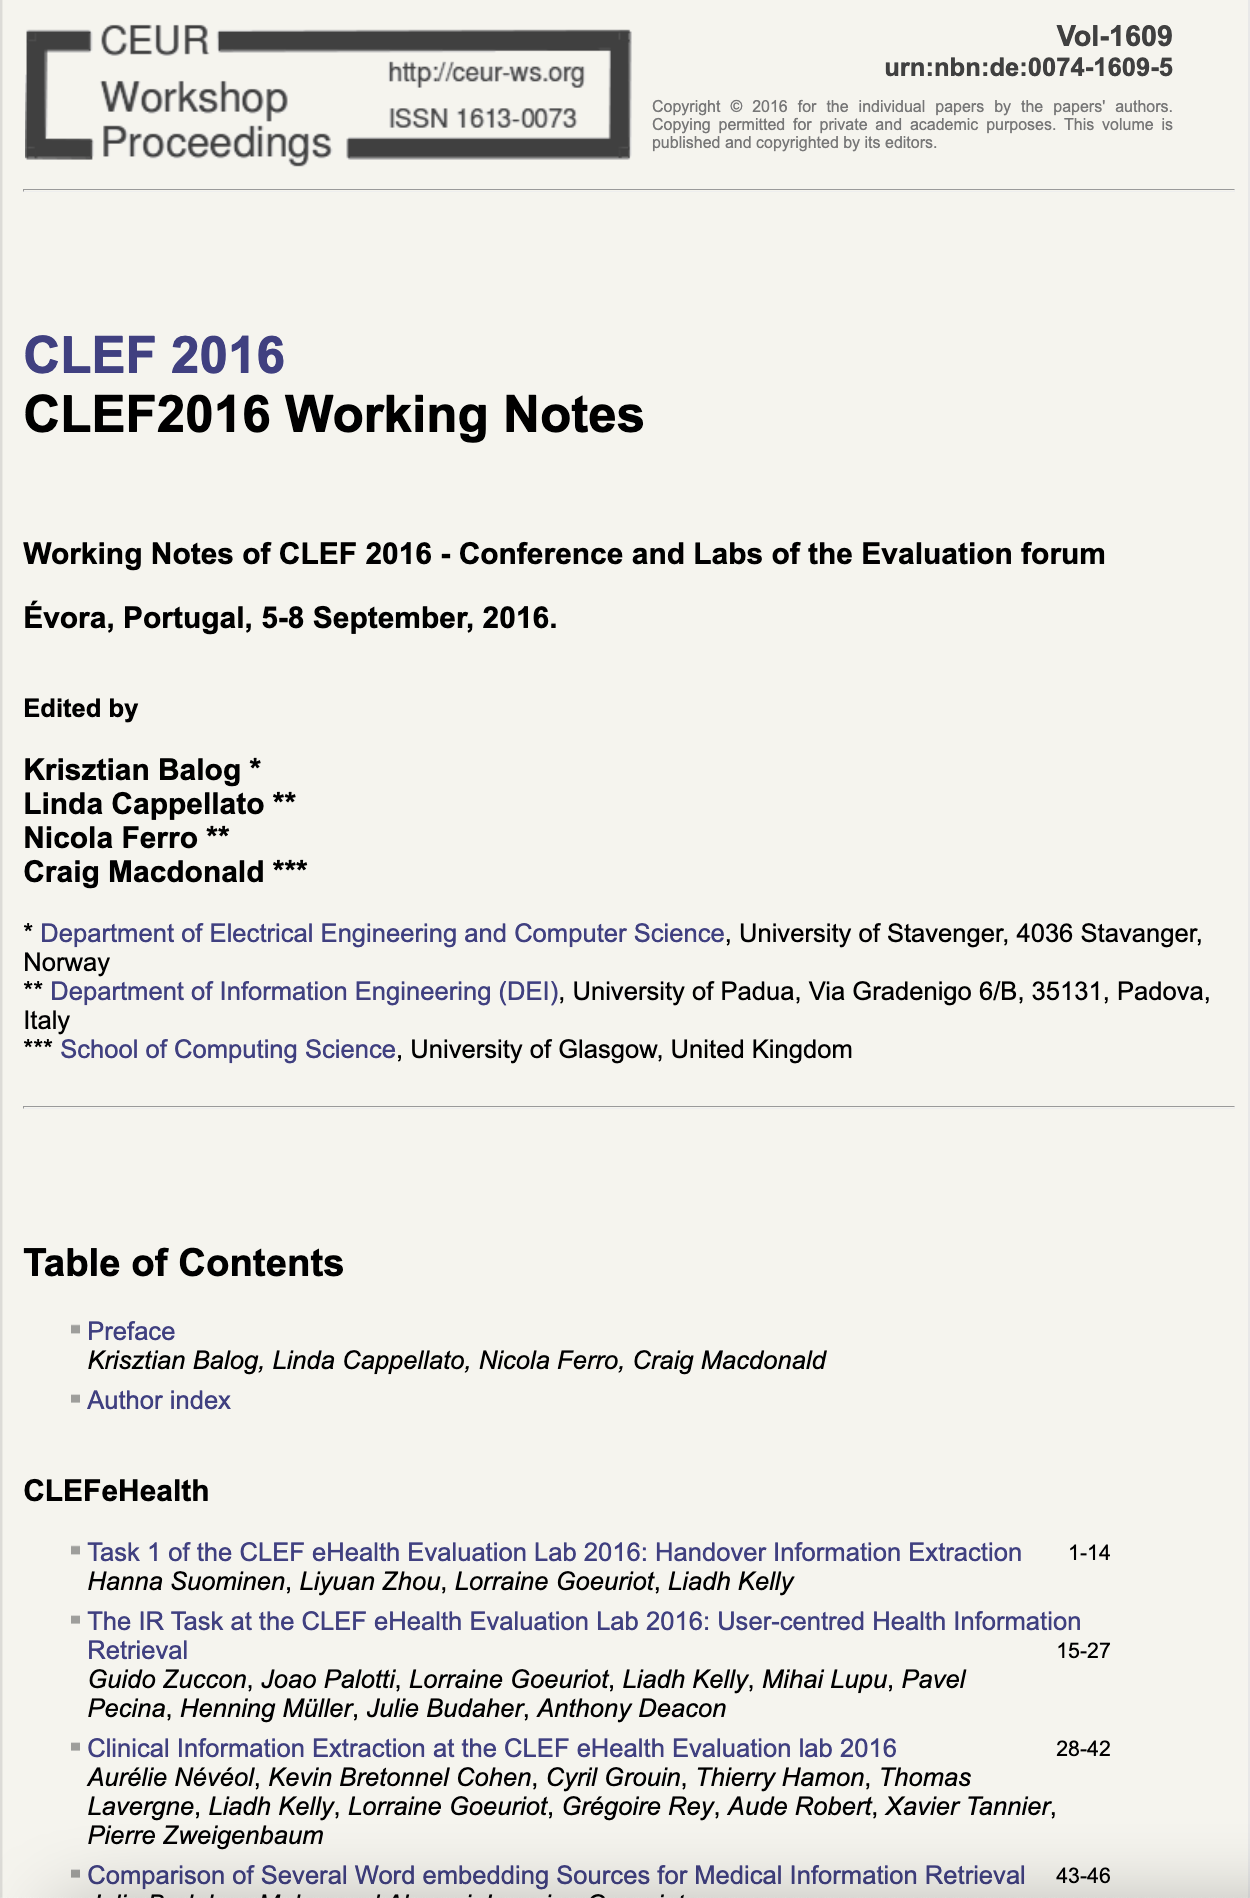 CLEF 2016 CEUR-WS Working Notes page